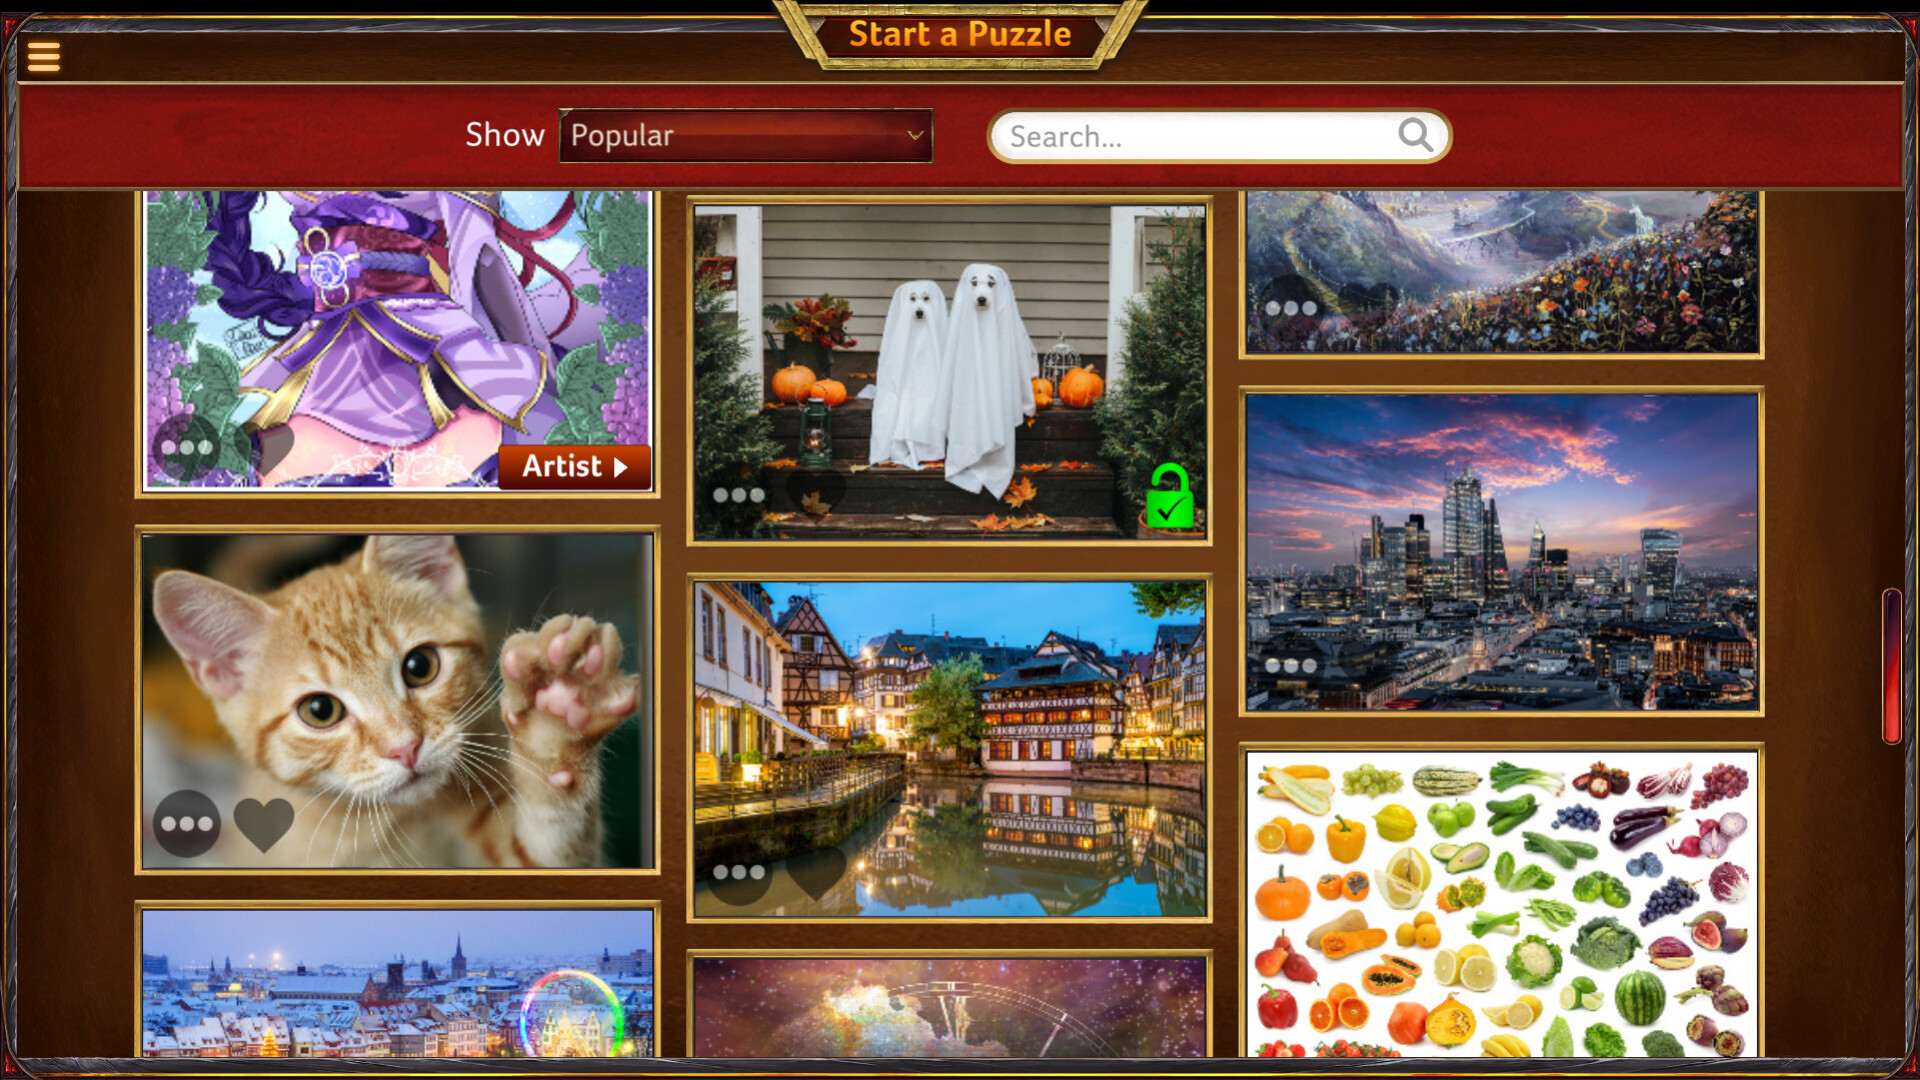 Puzzle Together Multiplayer Jigsaw Puzzles no Steam